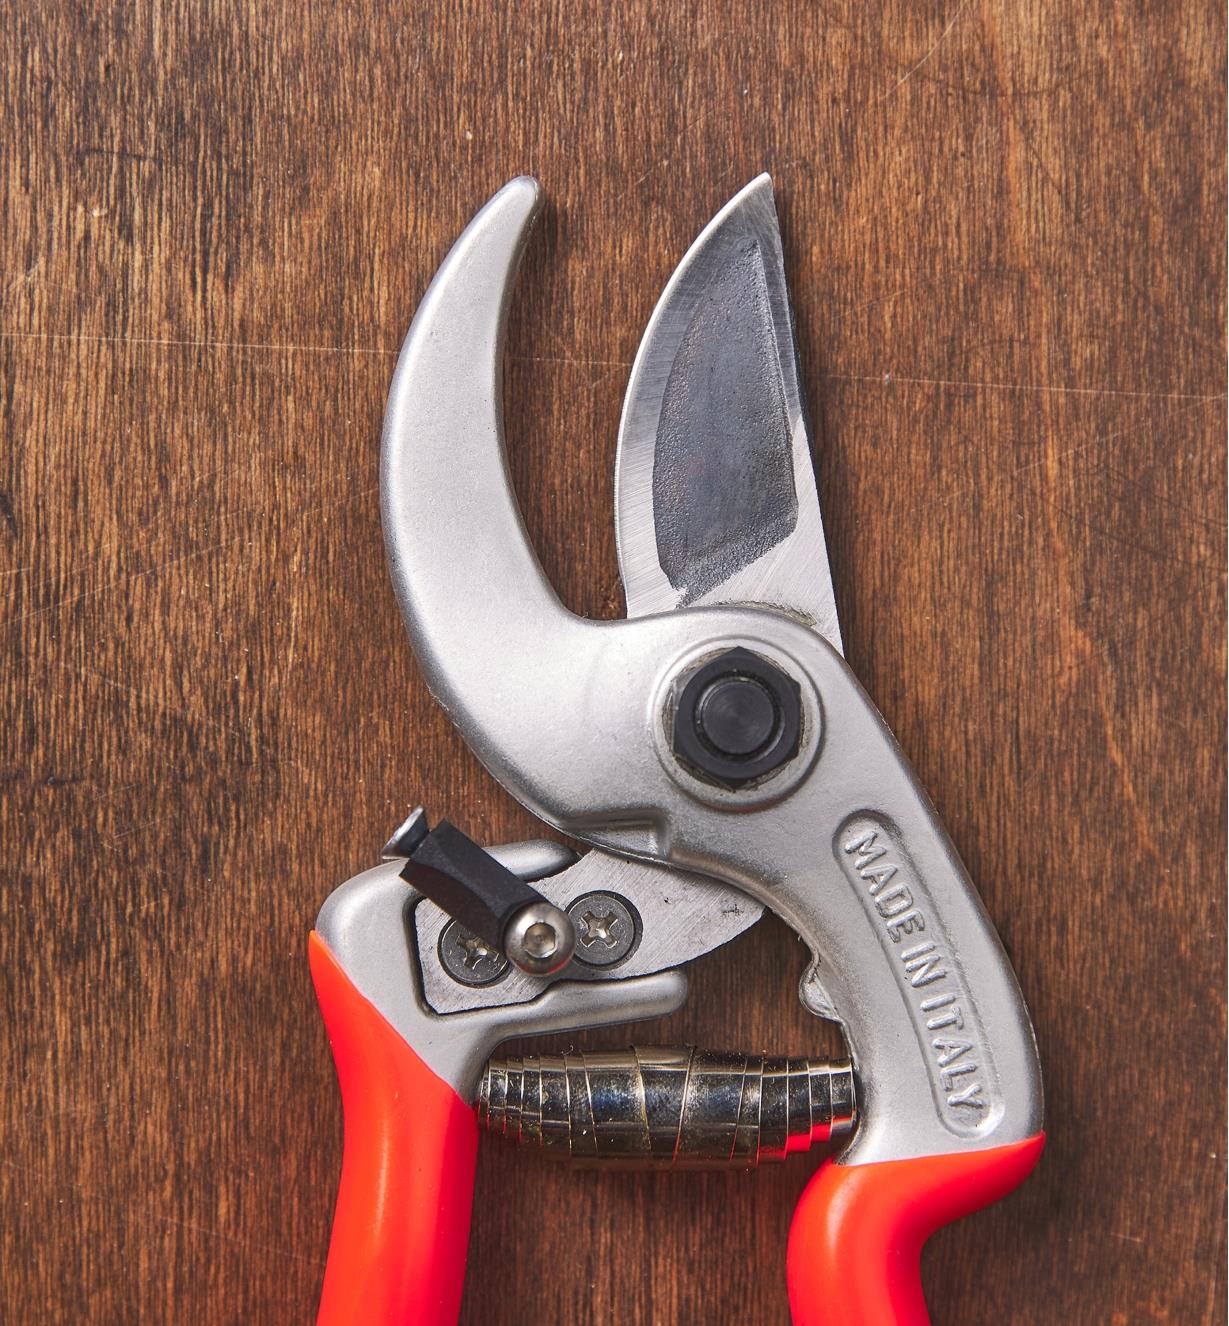 Close-up view of the cutting blade of the Castellari curved-anvil pruner